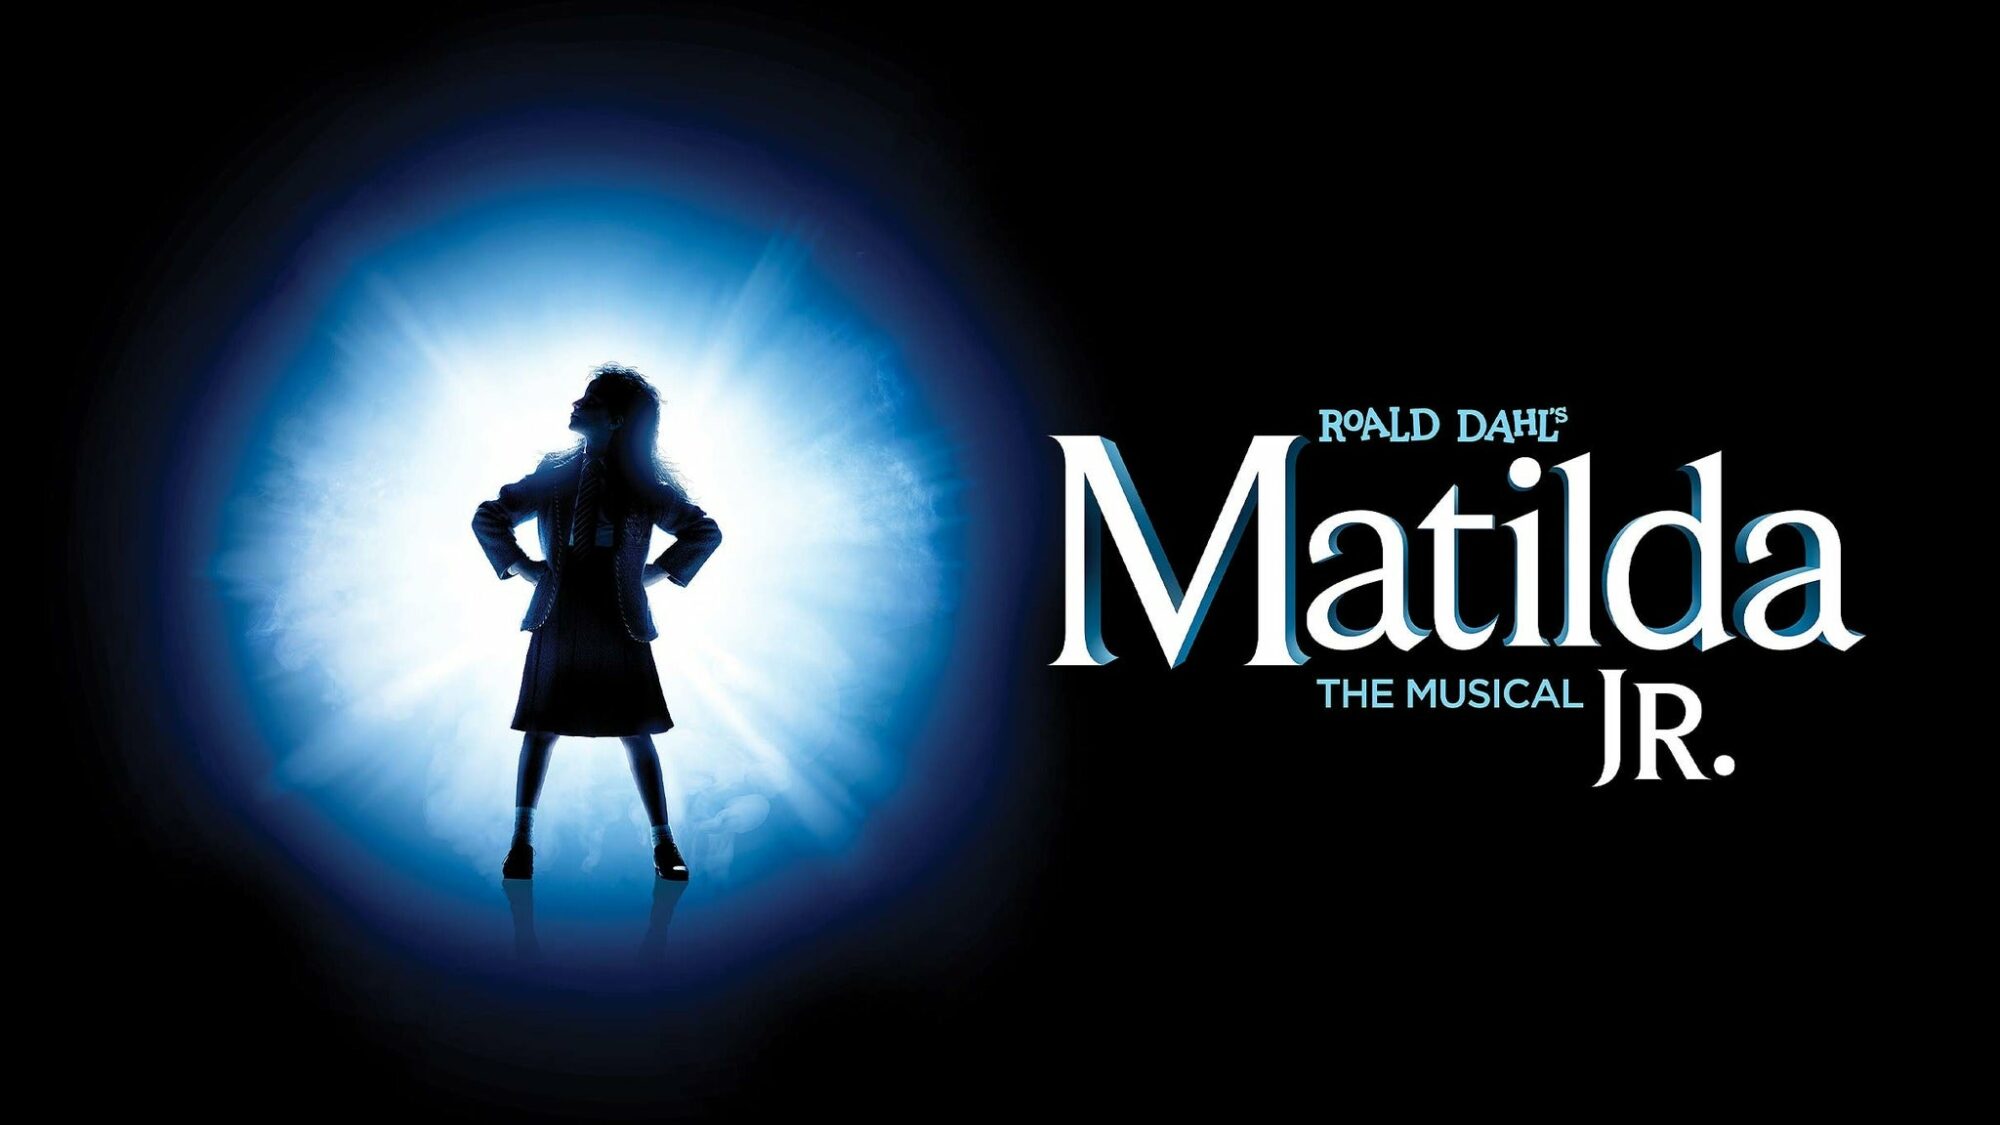 Image name Matilda Jr The Musical at Whitby Pavilion Theatre Whitby the 19 image from the post Events in Yorkshire.com.